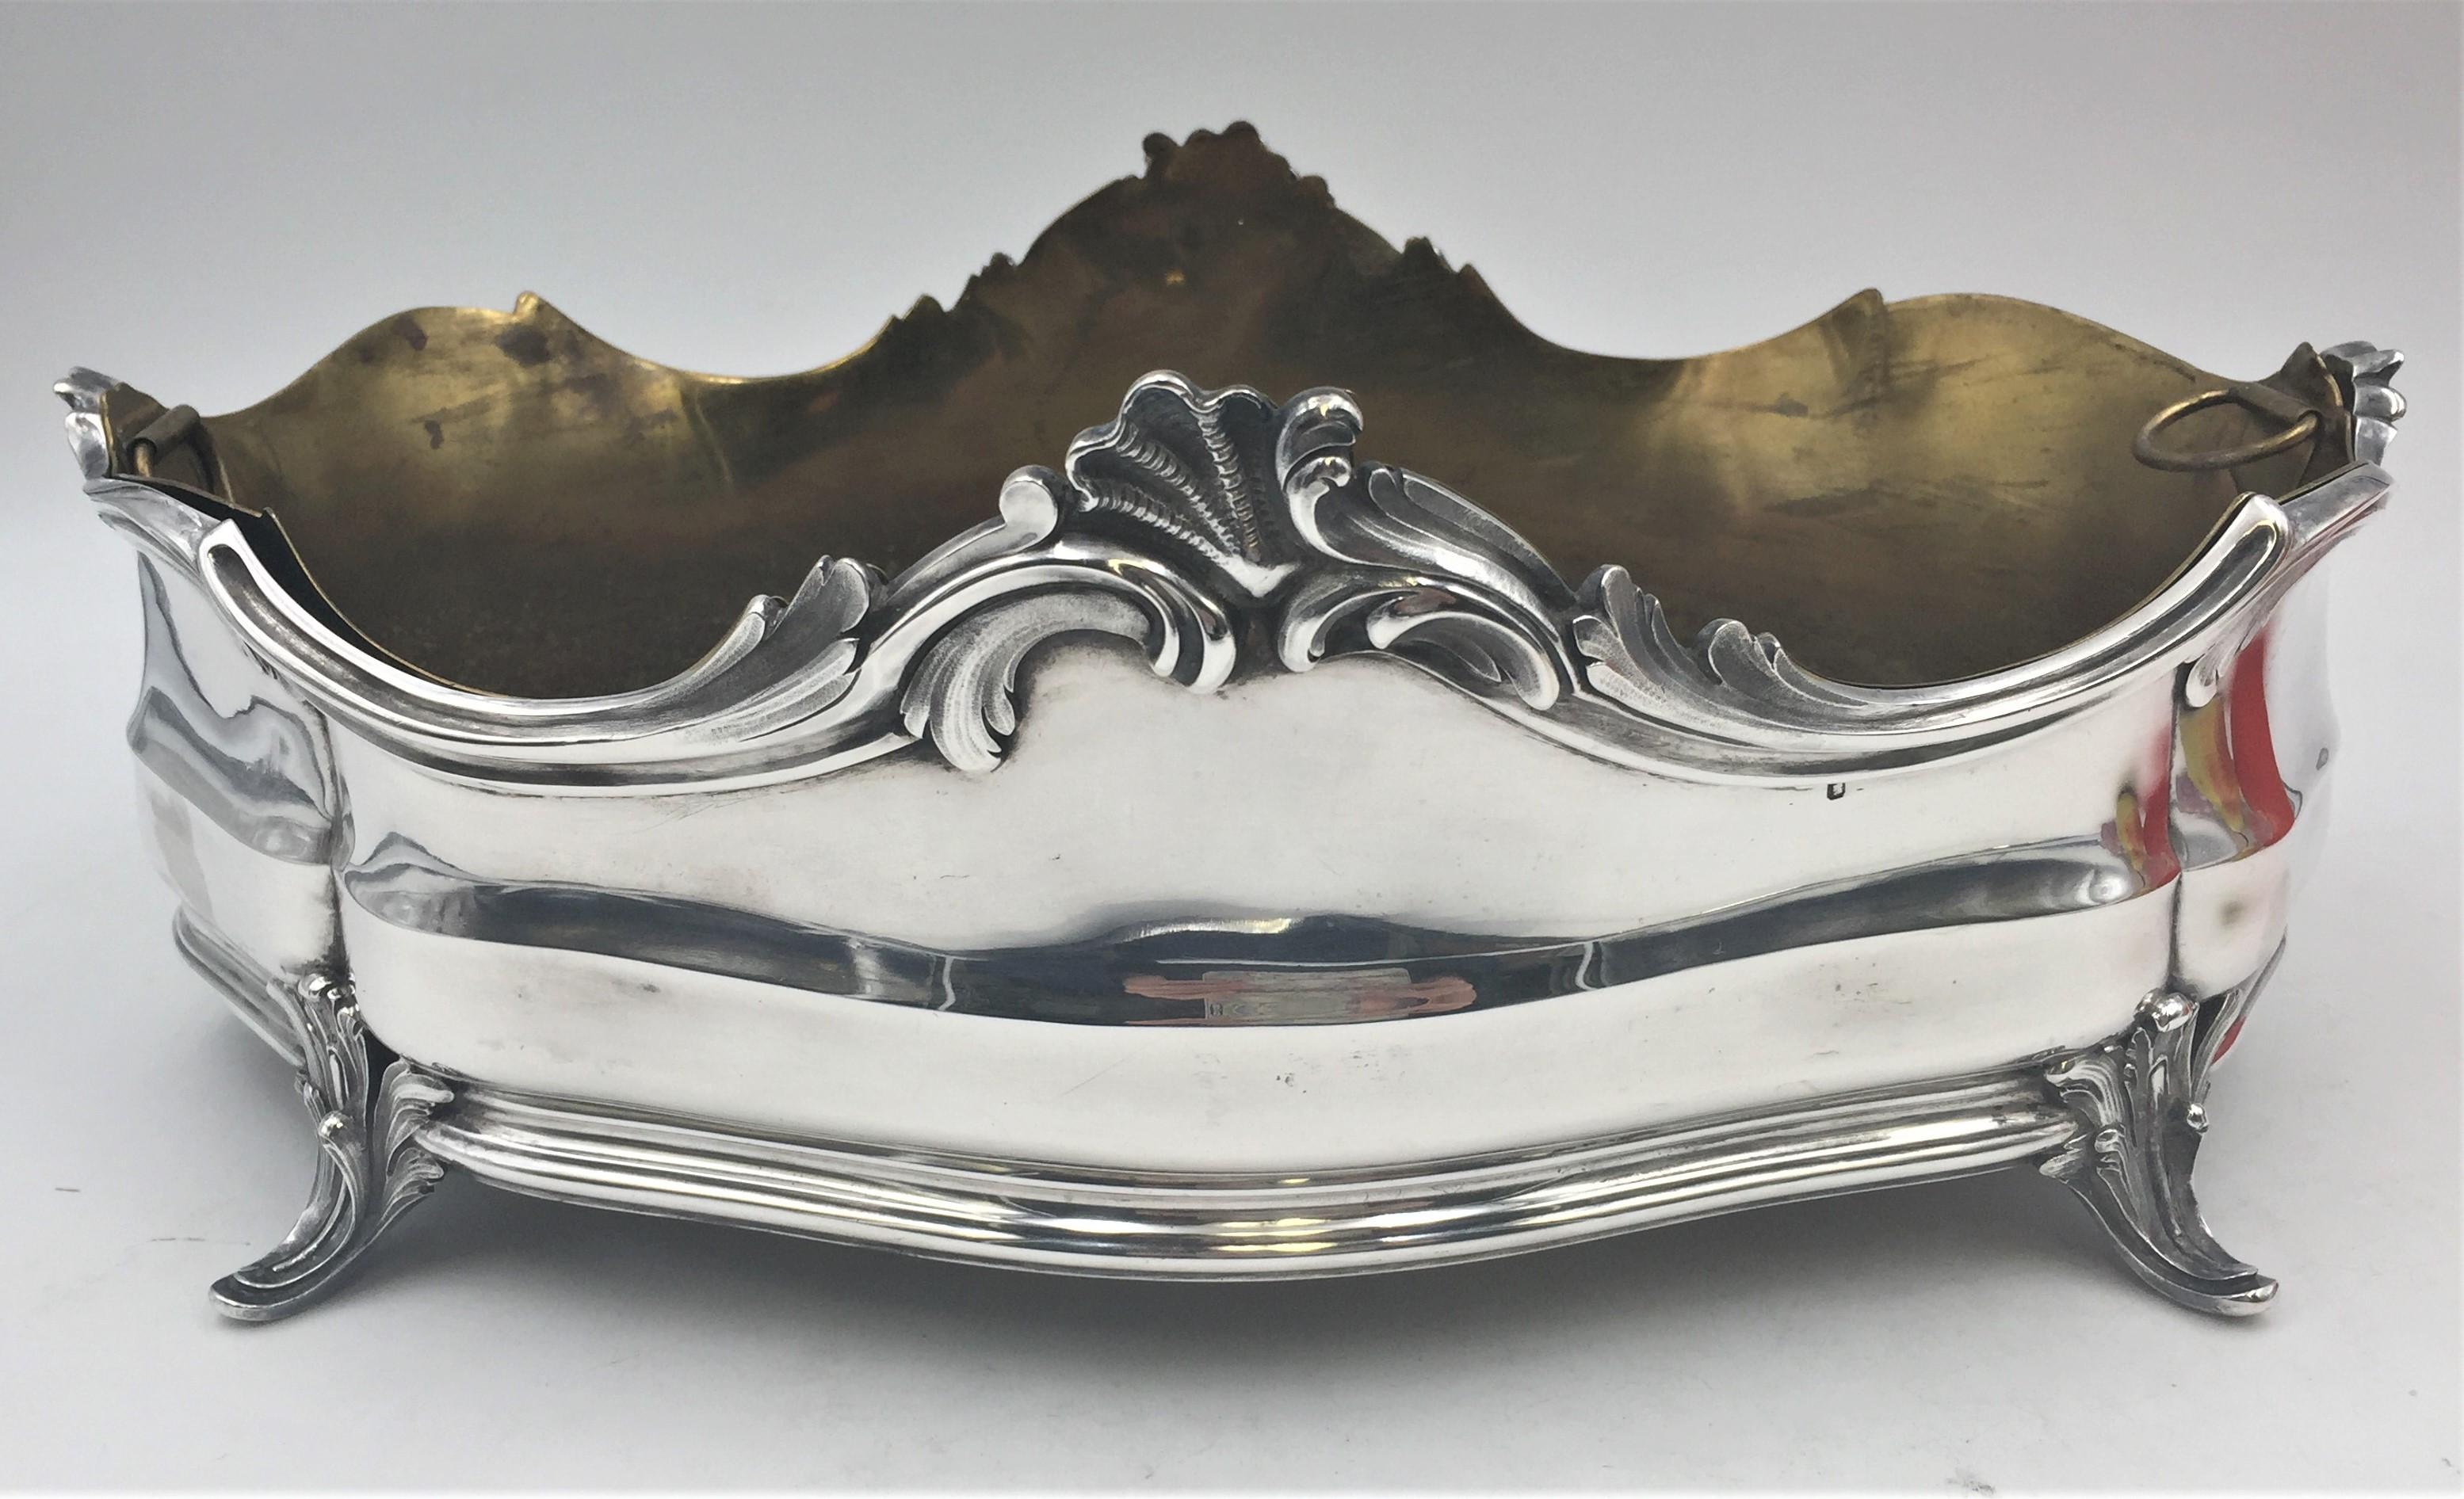 Robert Linzeler, French 0.950 silver centerpiece in ornate Rococo style with stylized motifs on the 4 feet and around the rim as well as an original, brass insert. It measures 13'' in length by 9'' in width by 5'' in height, weighs 40.7 ozt without